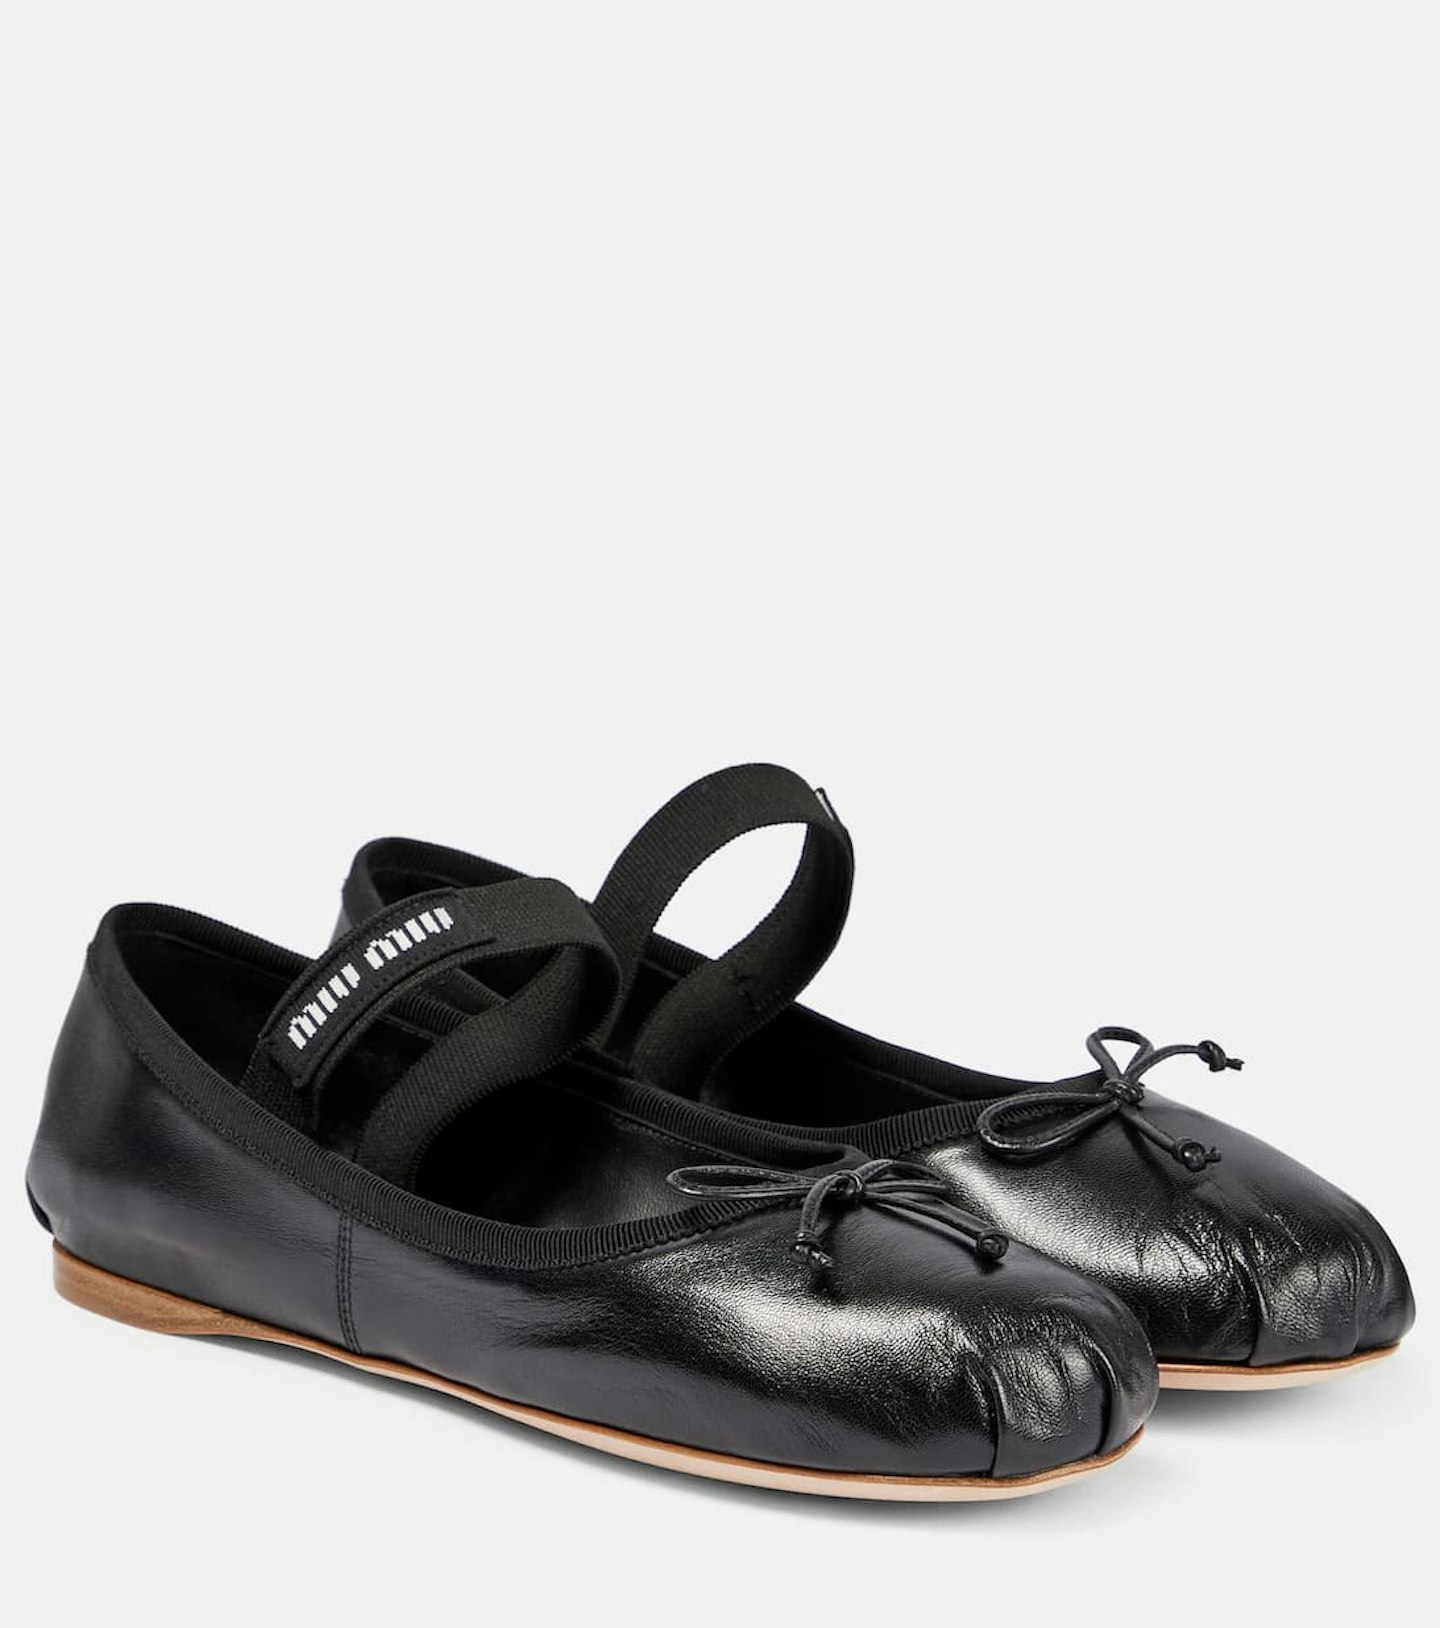 These Miu Miu Ballet Flats Have Put The Polarising Shoe Back On The ...